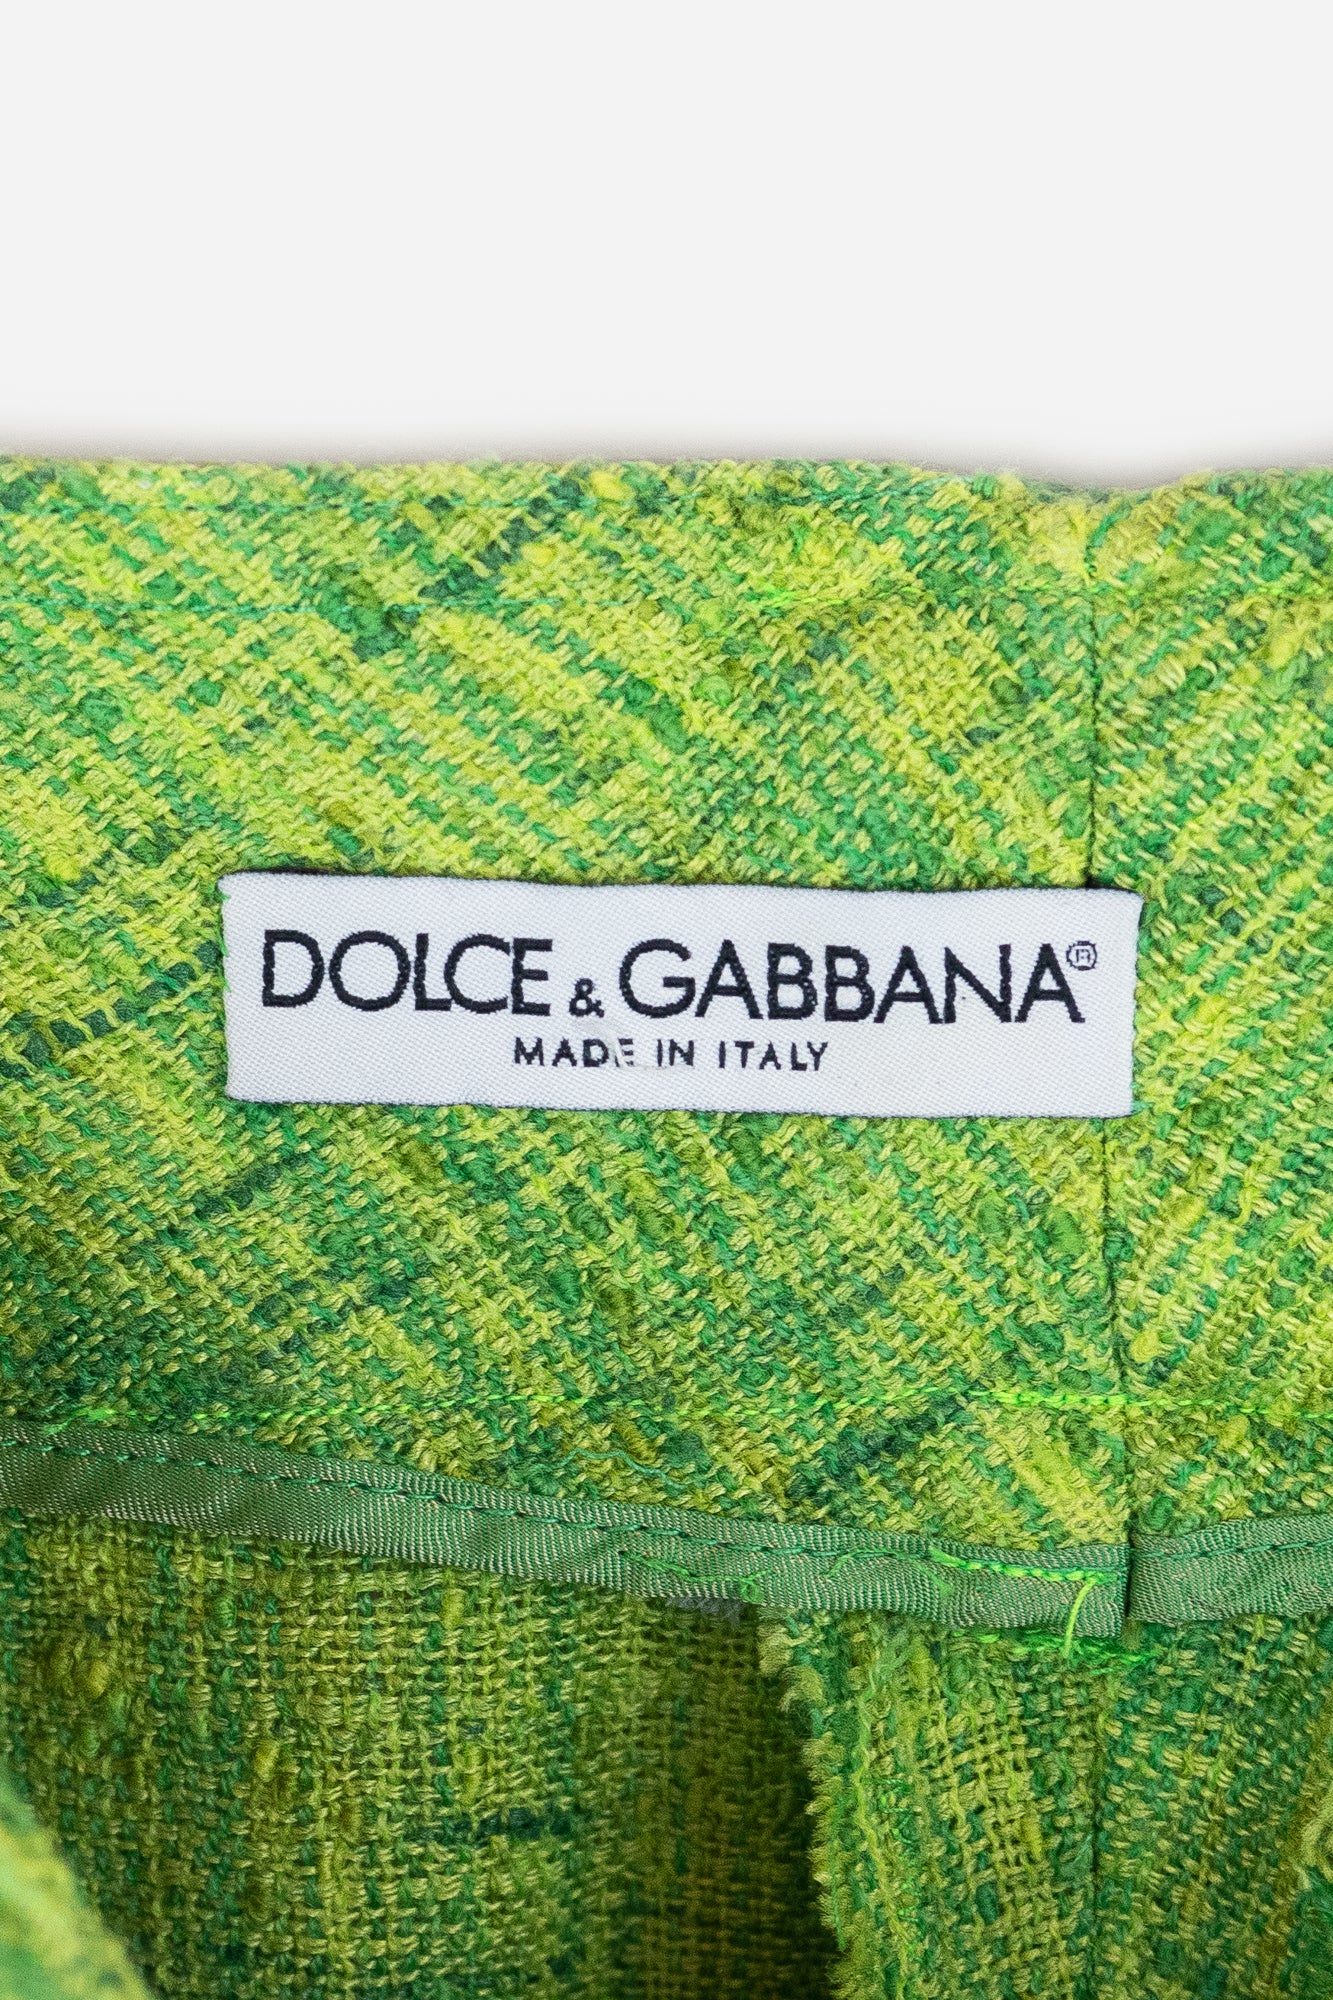 Lime Green Stitching Detail Trousers - So Over It Luxury Consignment